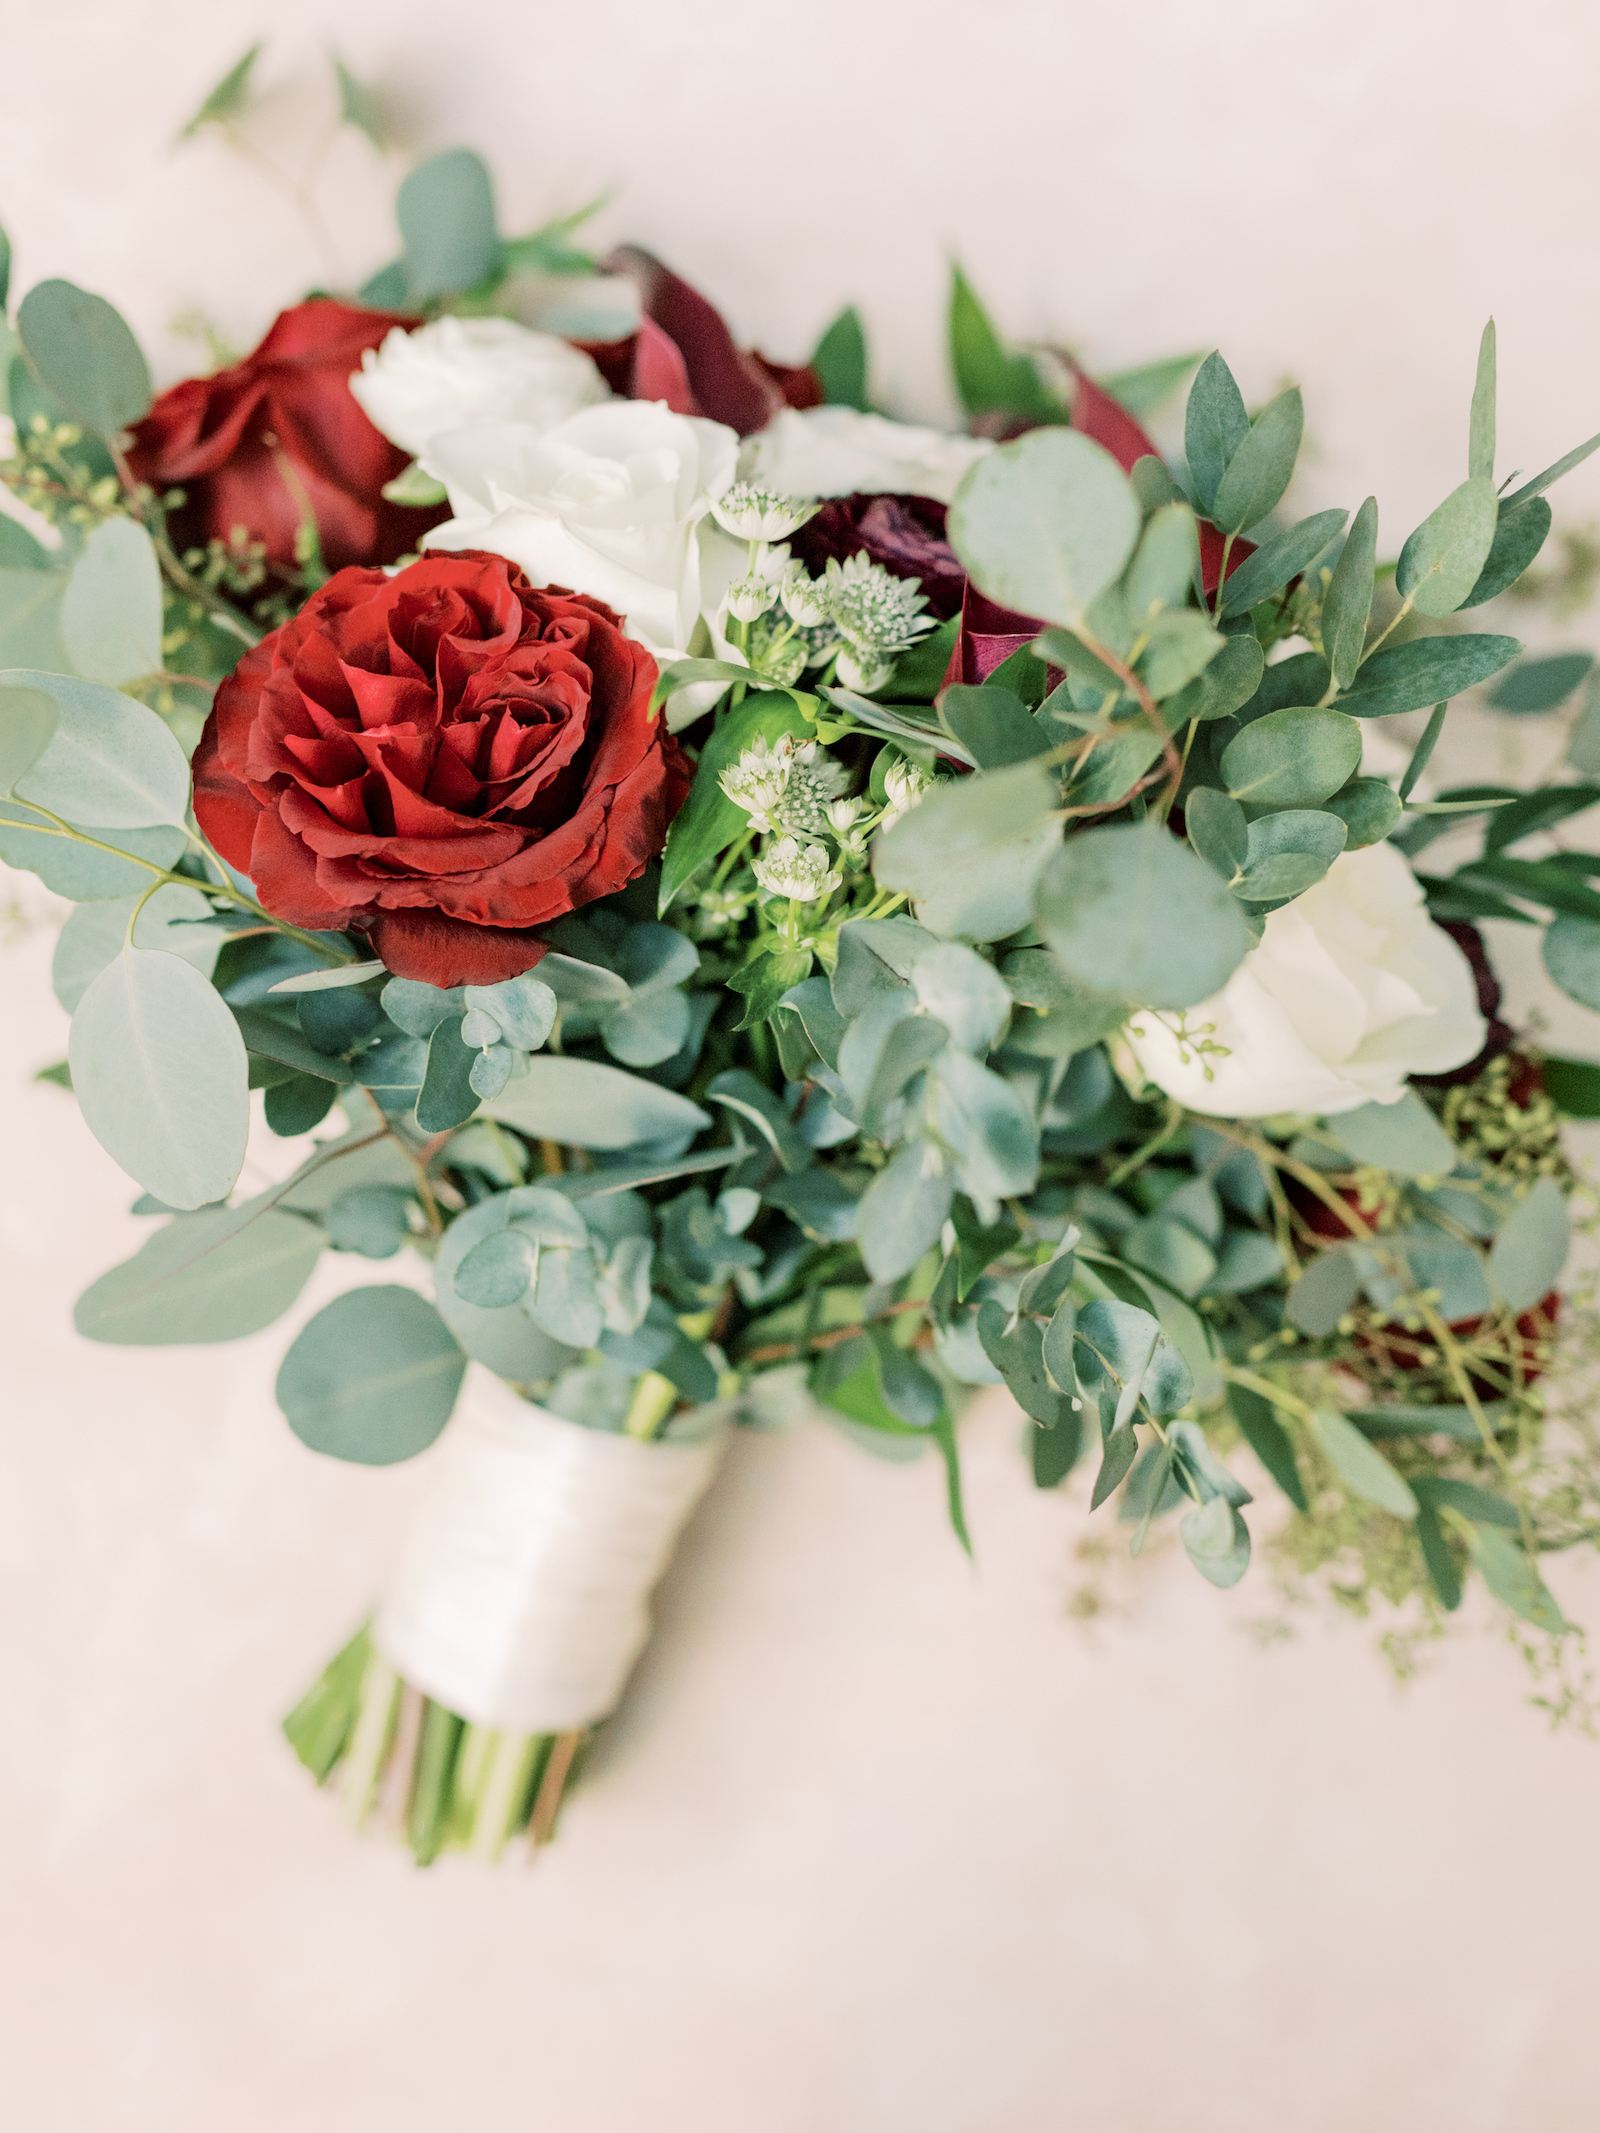 Fall Red White and Green Wedding Bridal Bouquet with Eucalyptus Greenery and Red and White Roses